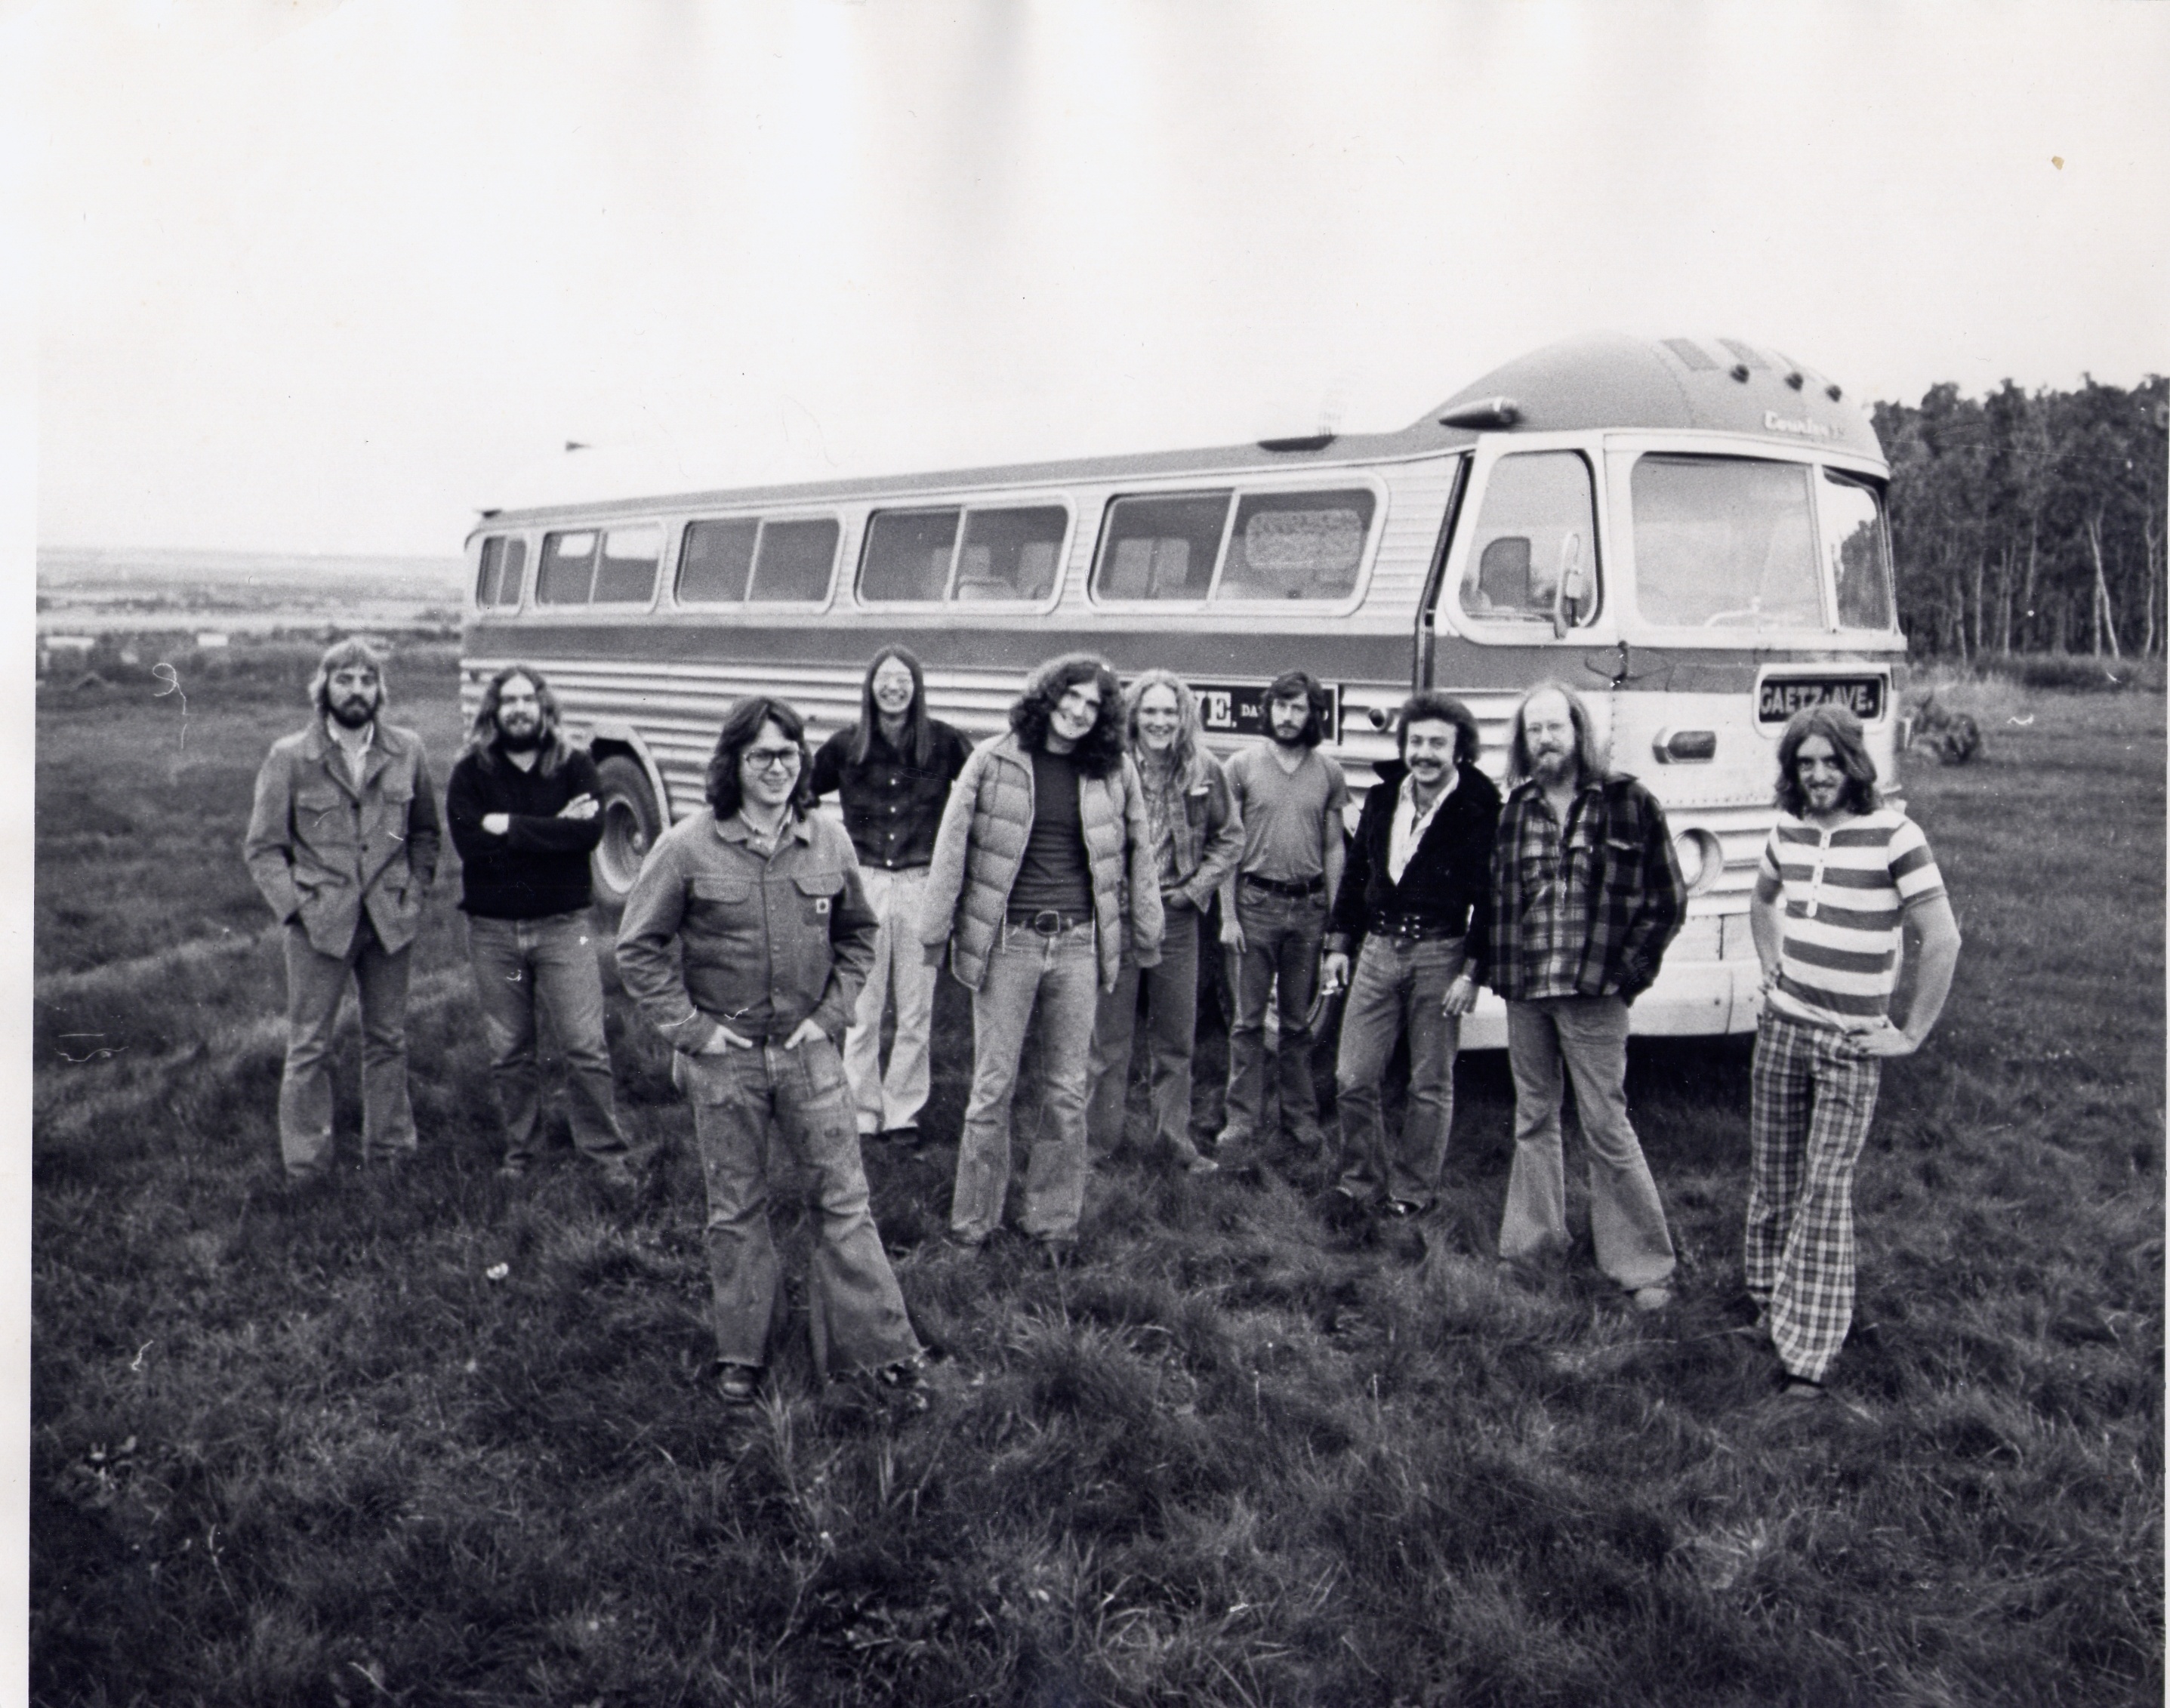 GOOD TIMES – Members of the popular Gaetz Avenue Dance Band pose for a photo back in the early 1970s. Several original members of the band